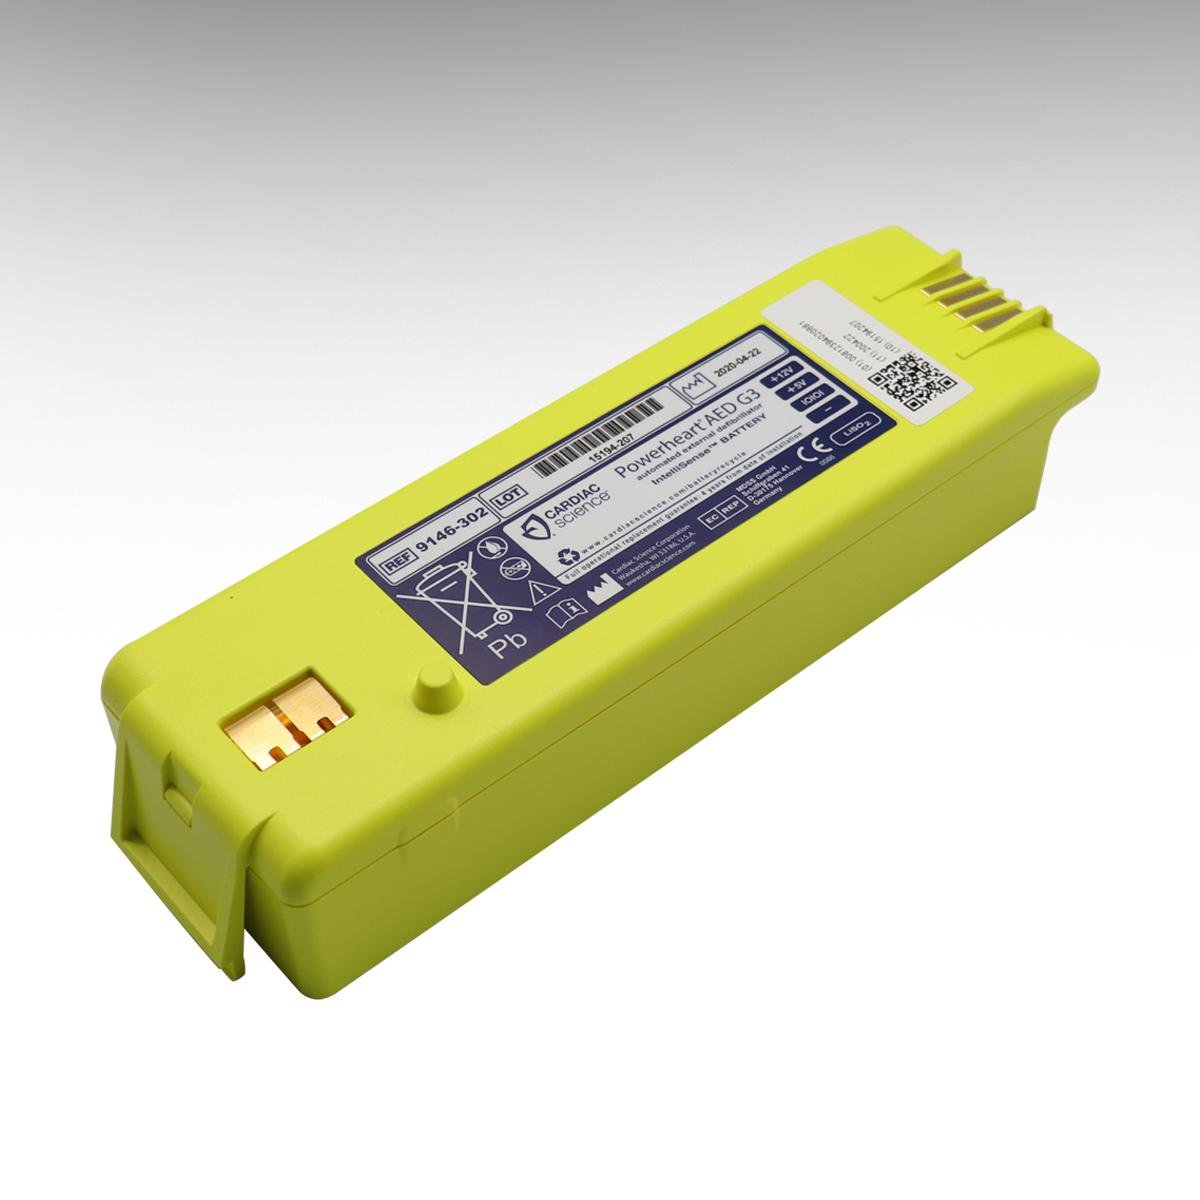 Cardiac Science REF 9146-302 AED G3 Automated external defibrillation battery 4